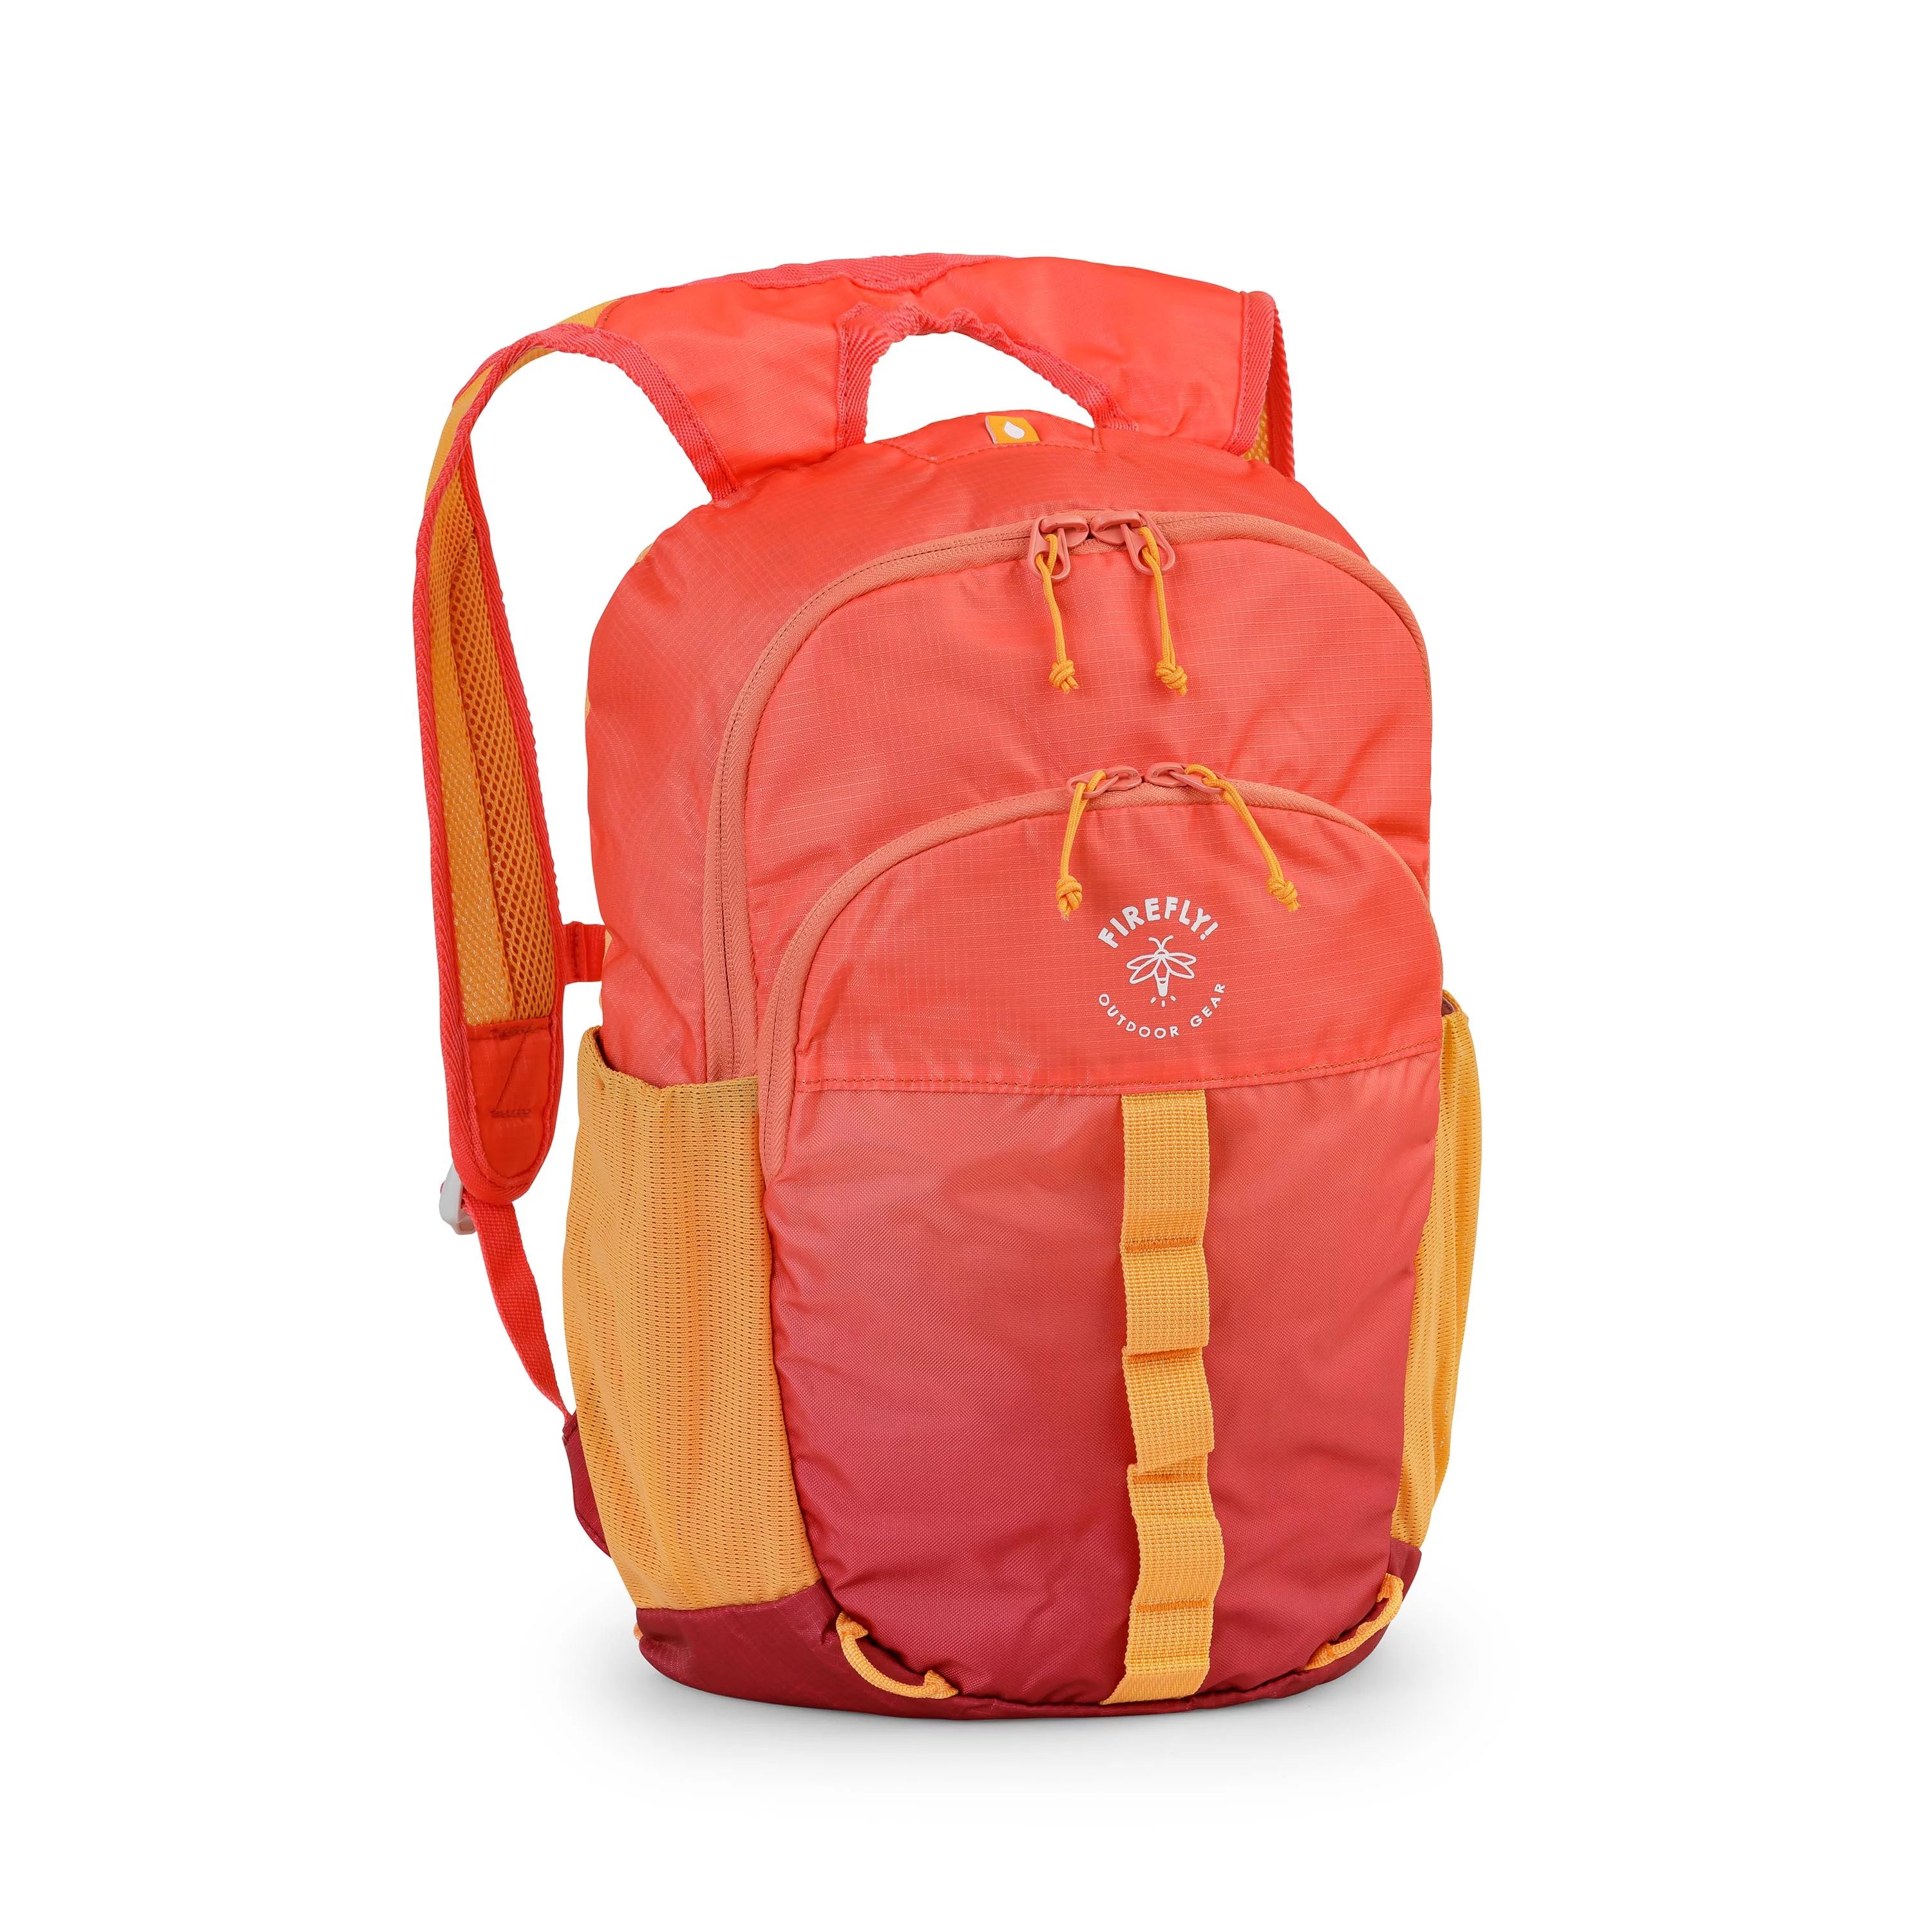 Firefly! Outdoor Gear Youth Outdoor Camping Backpack - Red/Orange, Unisex, Ages 9-12 (13 Liter), ... | Walmart (US)